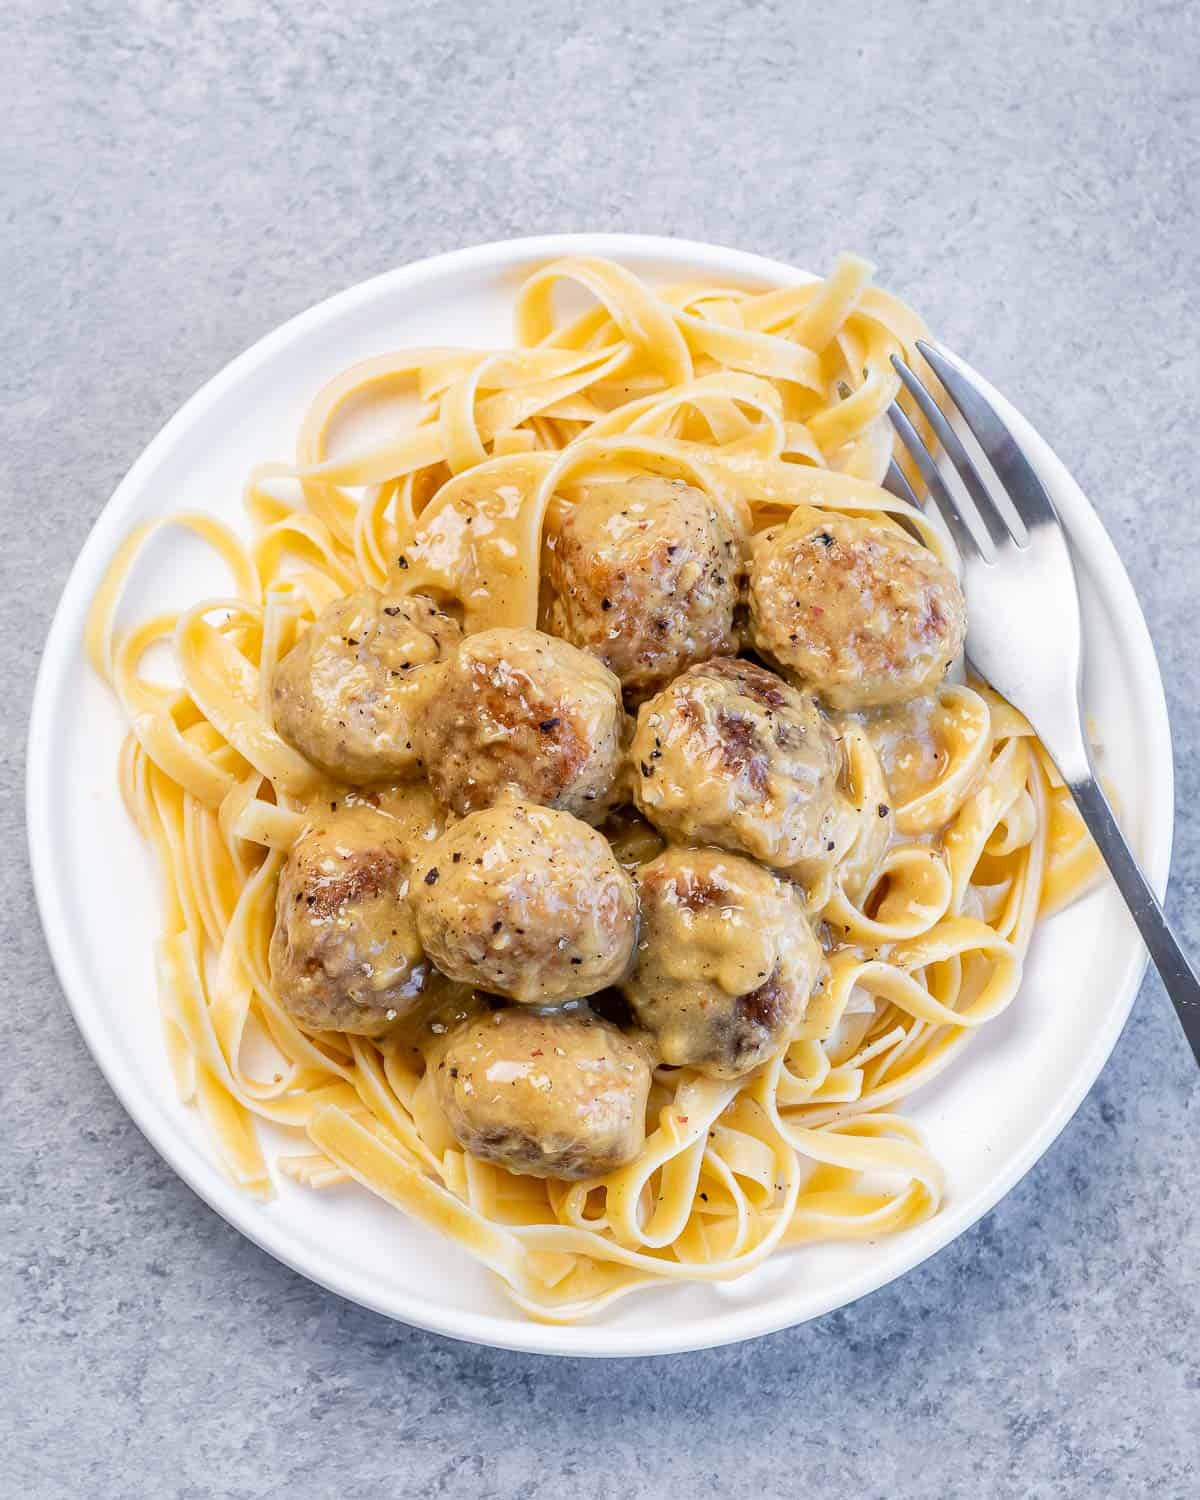 Swedish meatballs served over pasta on a white plate.